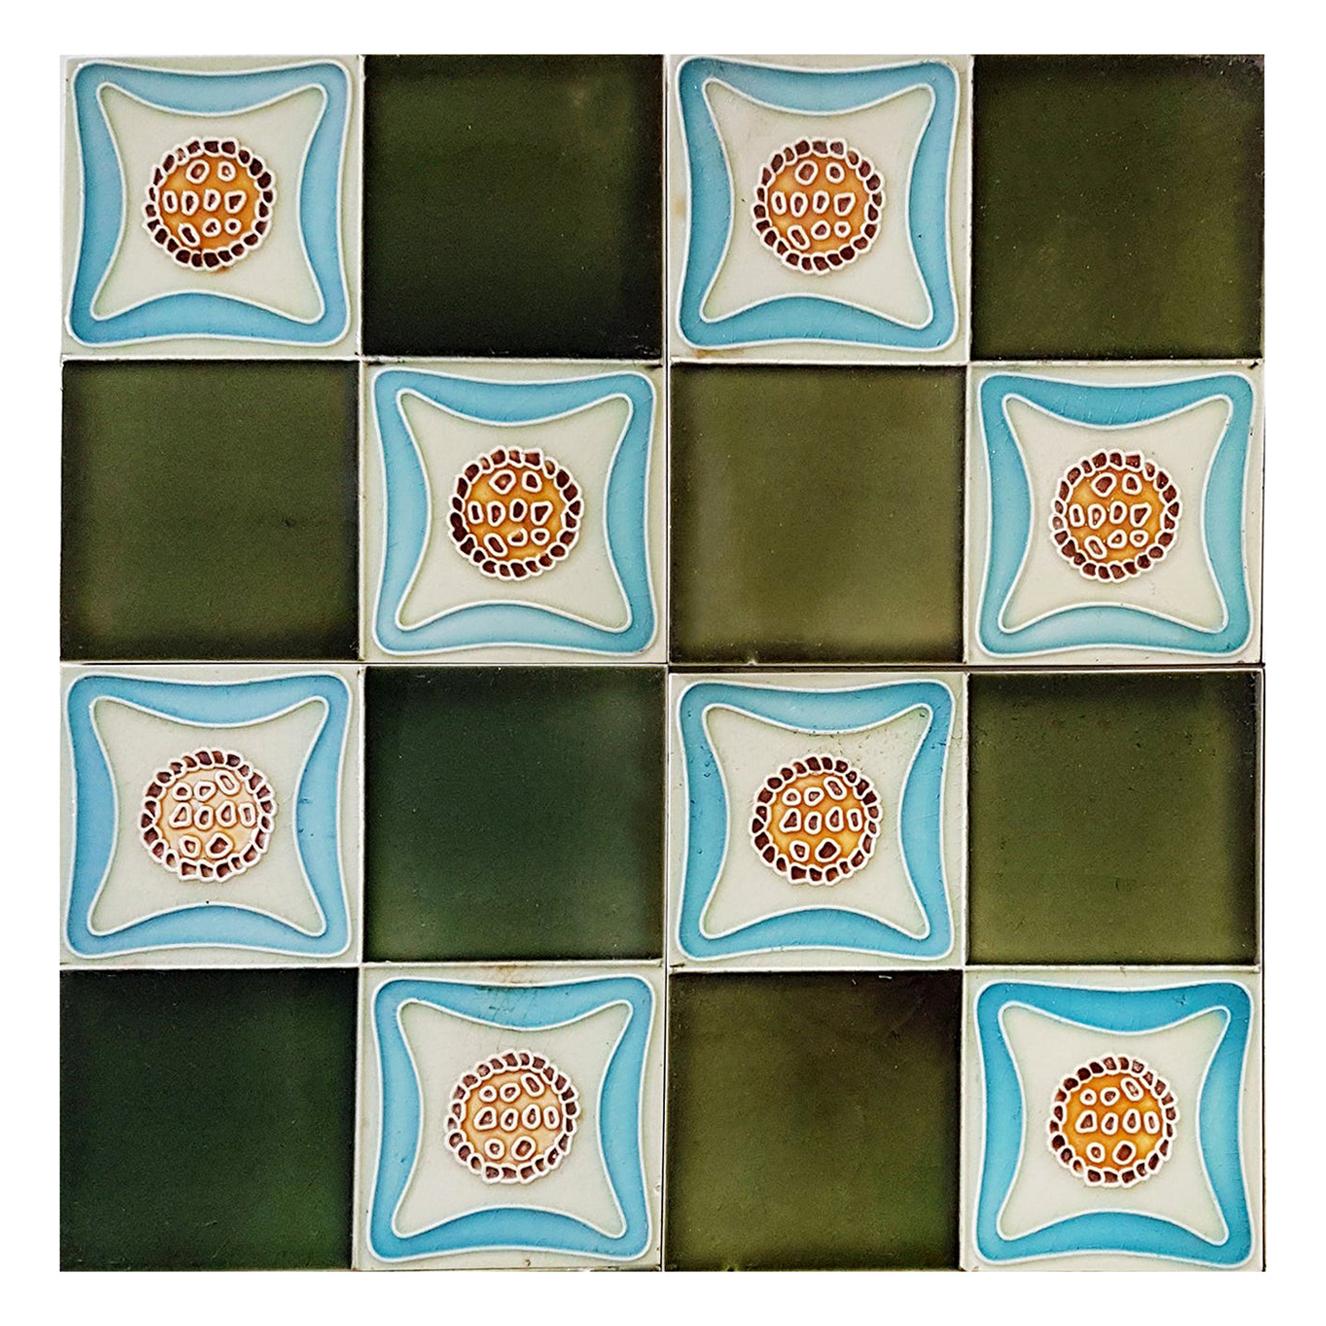 Recently lifted from its original home, this unique and antique set of Art Deco handmade tiles. A beautiful relief and color. With stylized design. These tiles would be charming displayed on easels, framed or incorporated into a custom tile